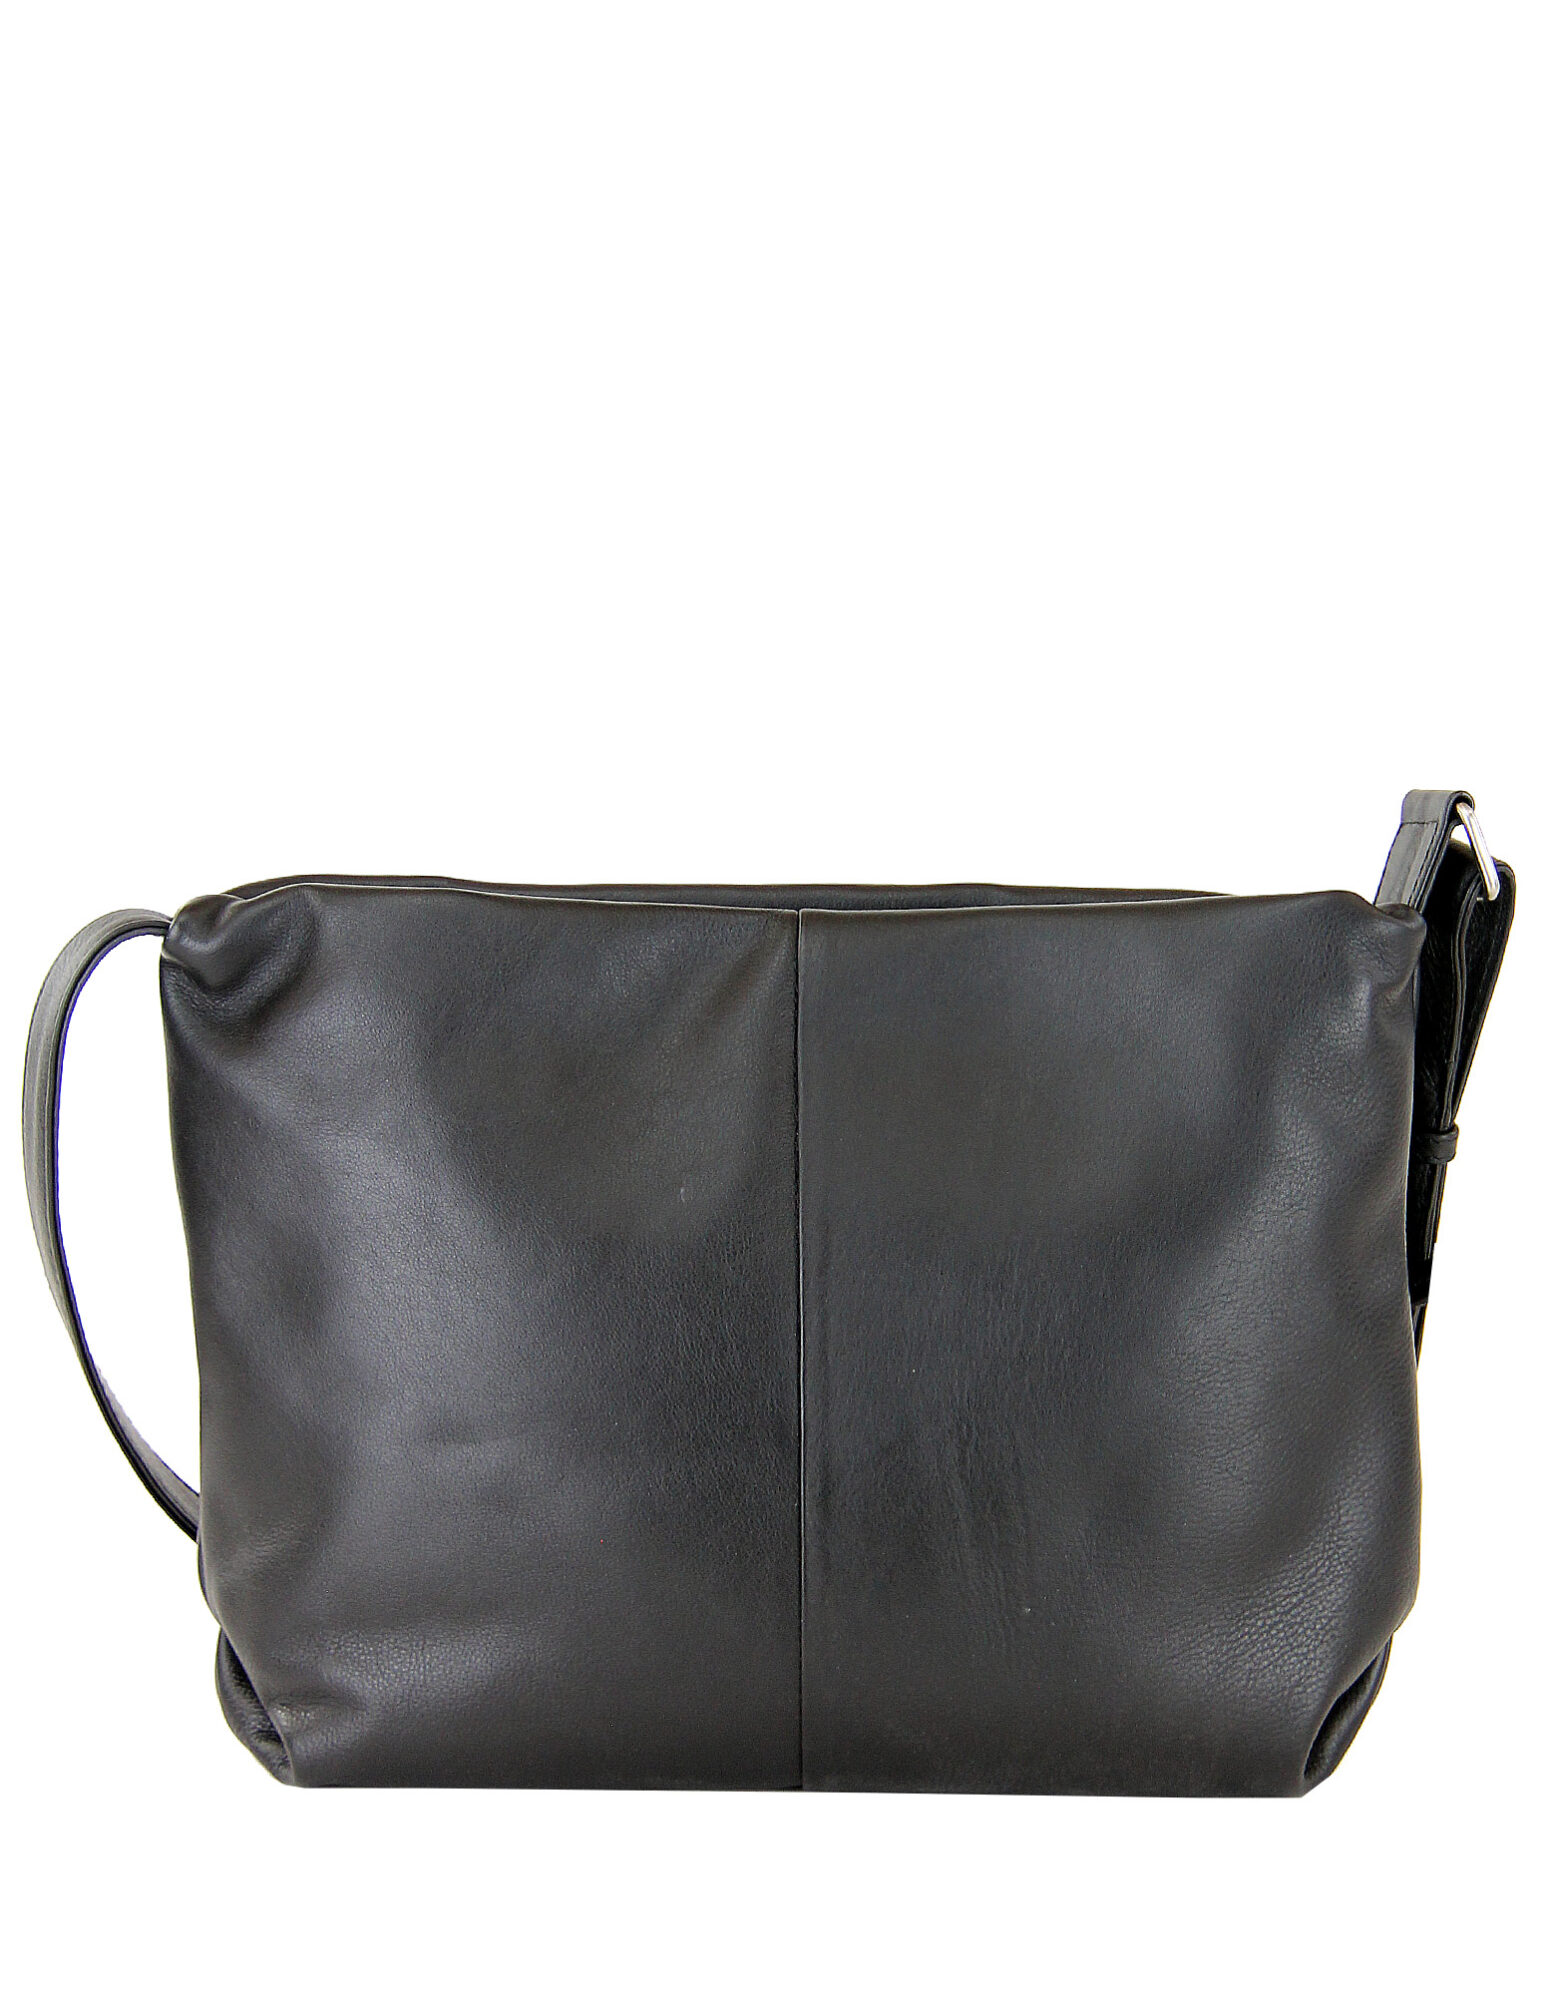 Leather Bags | Gorgeous Women's Leather Handbags Online